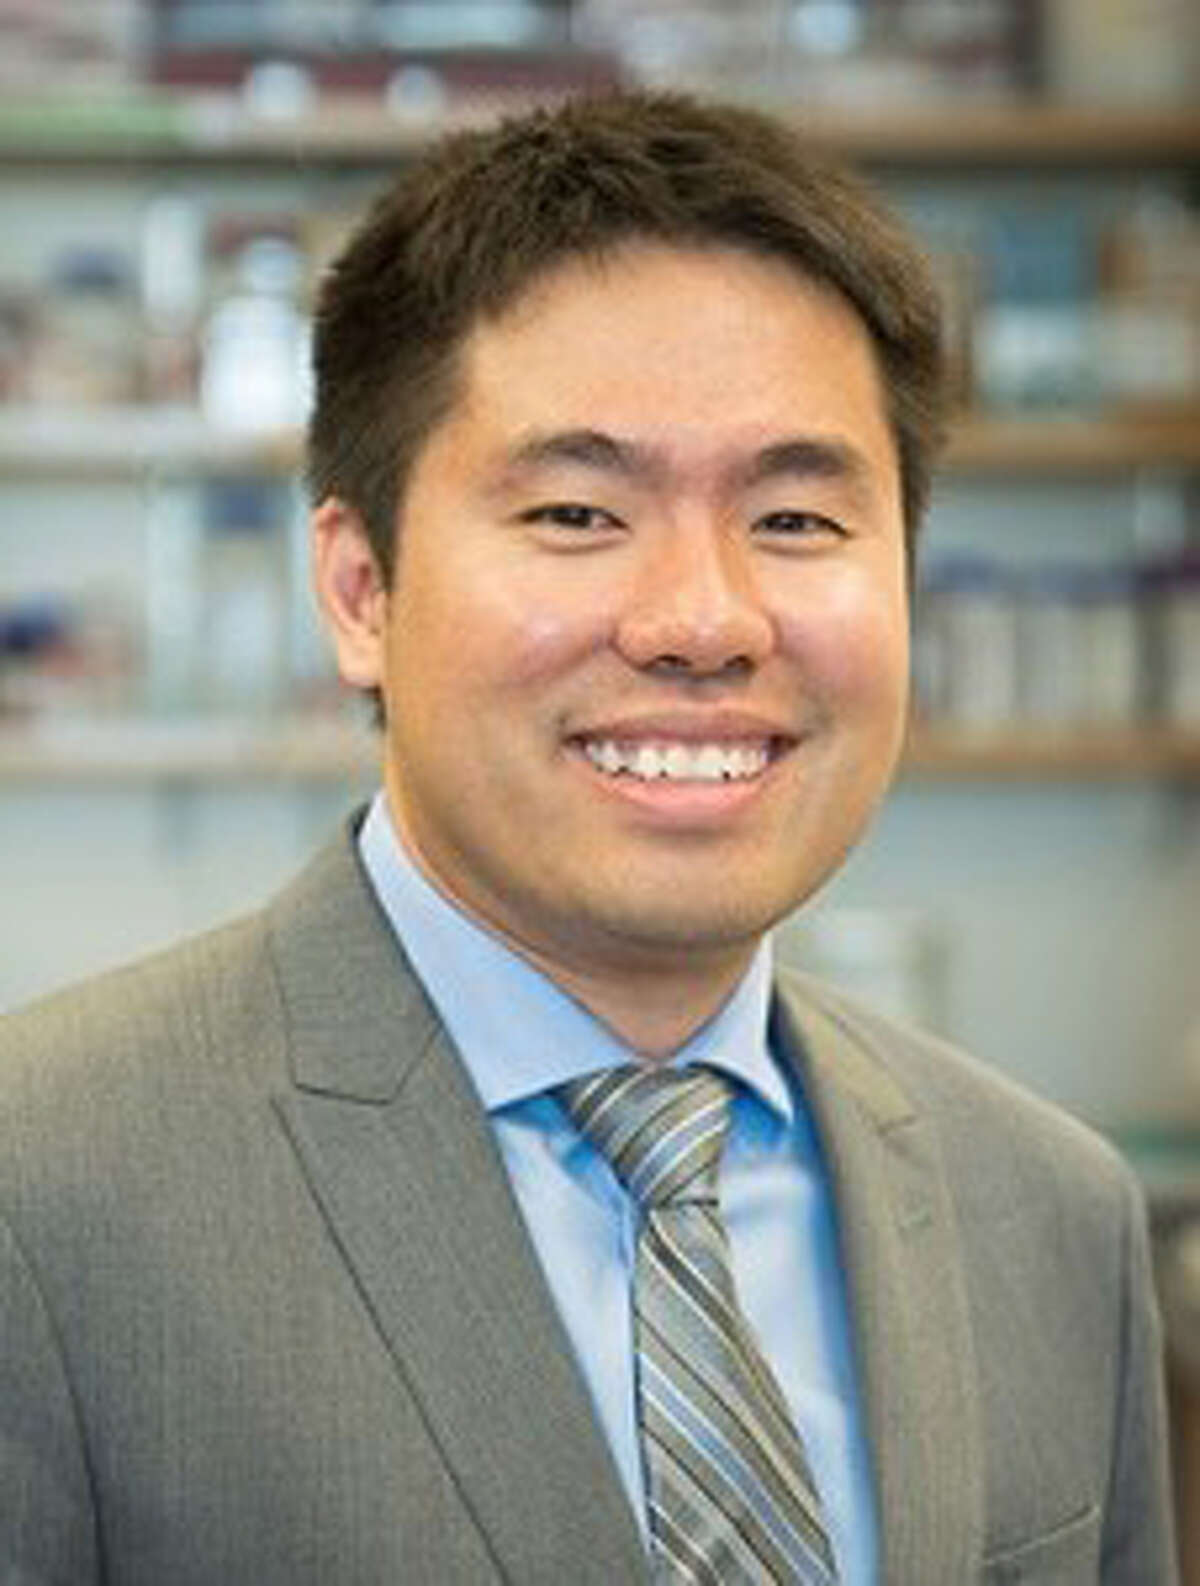 Albert Cheng, 33, Farmington, Scientist, engineer, assistant professor "A genome engineer with a Ph.D. from MIT, Cheng became an assistant professor at the Jackson Laboratory and UConn Health at age 31." - Connecticut MagRead more about the 2018 class of 40 Under 40 at ConnecticutMag.com